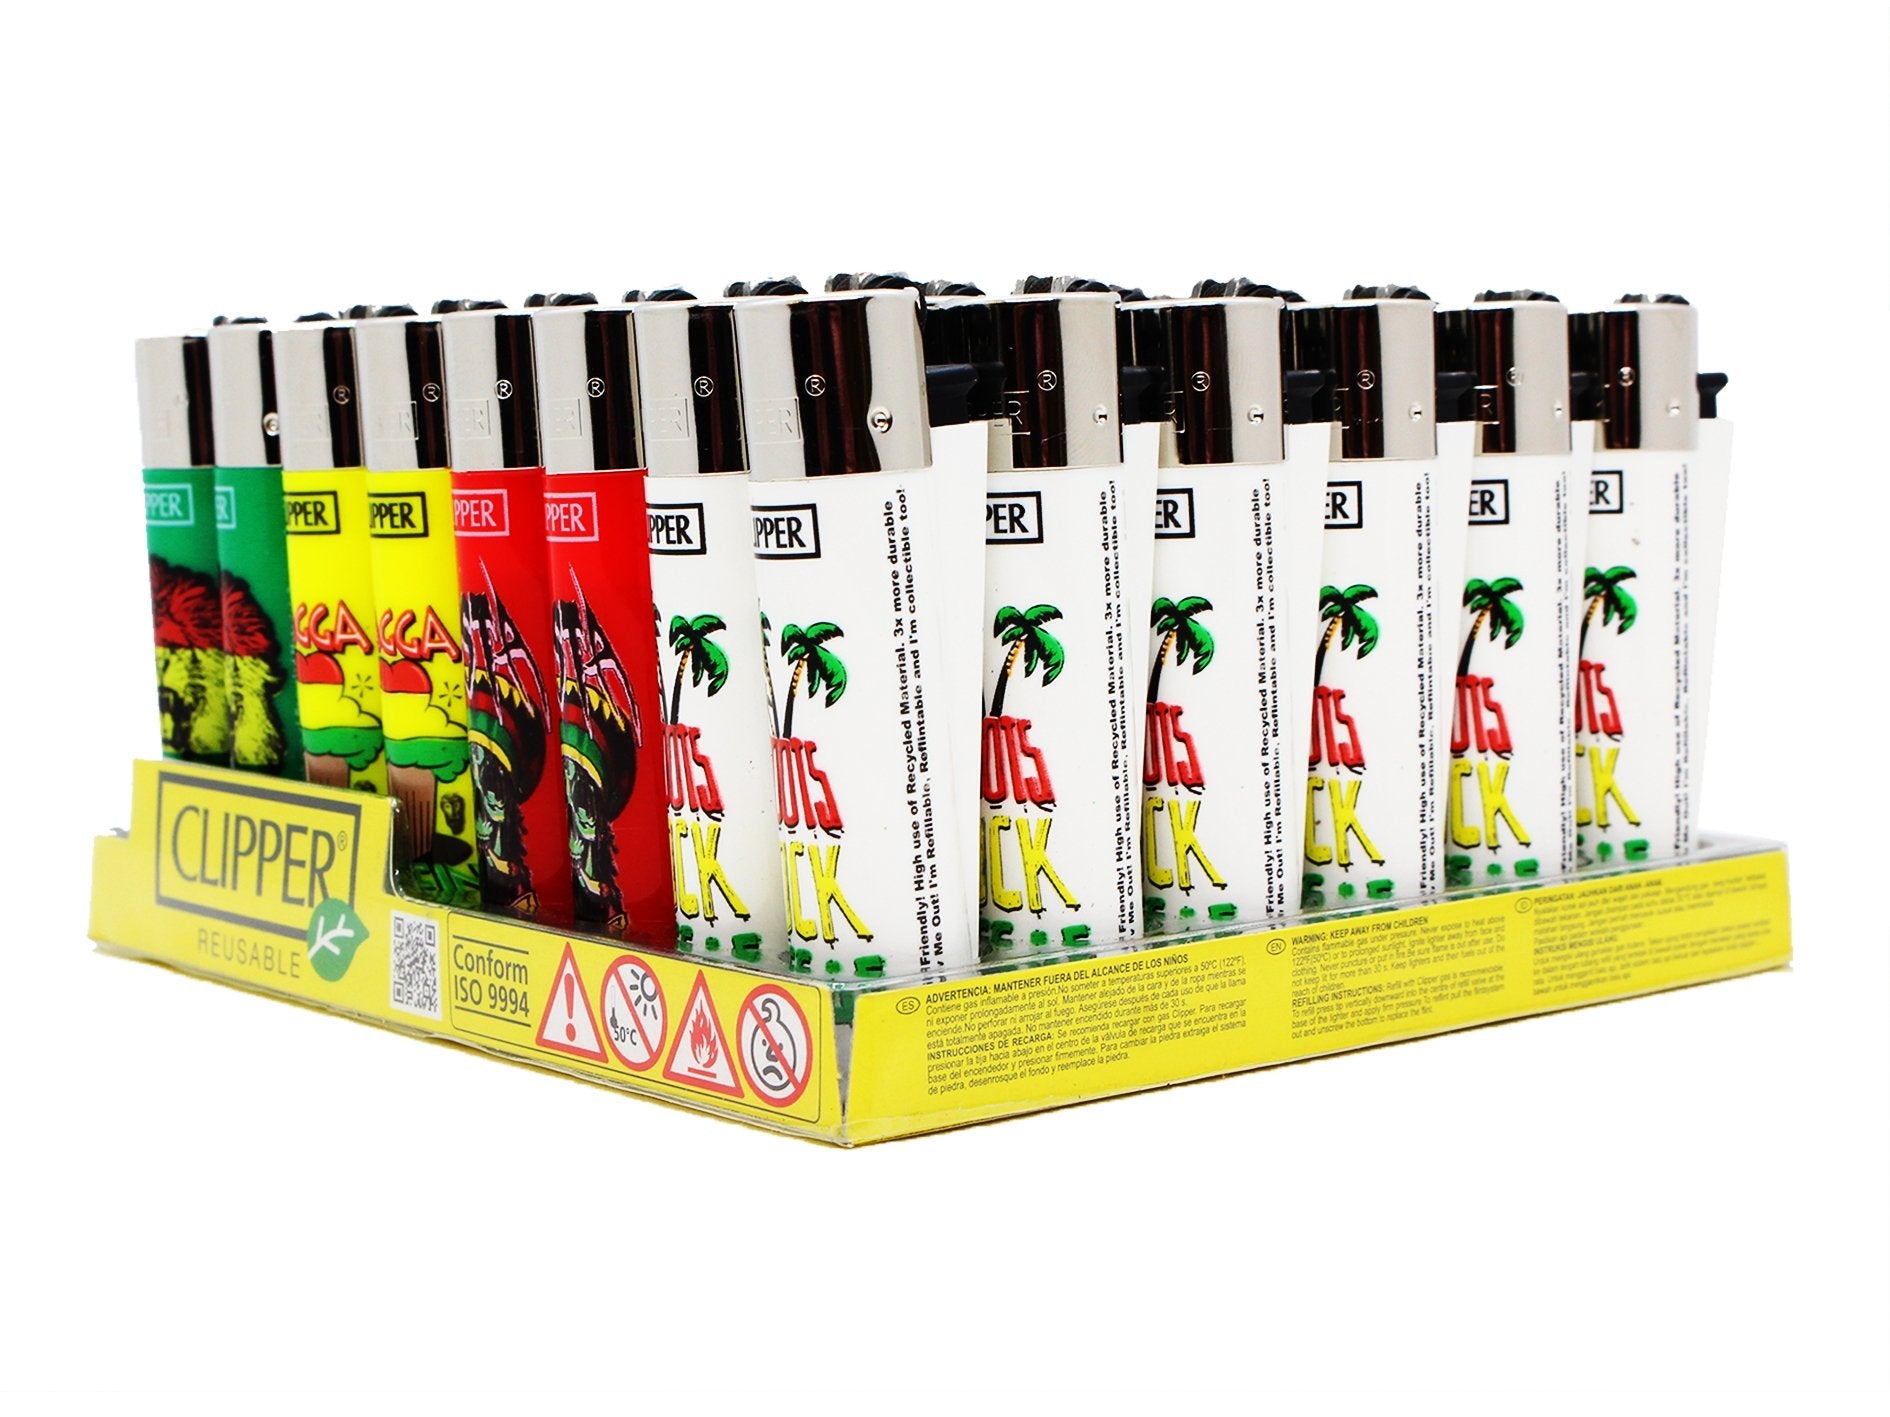 CLIPPER Lighters Printed 48's Various Designs - Rasta Exclusive from USA - VIR Wholesale